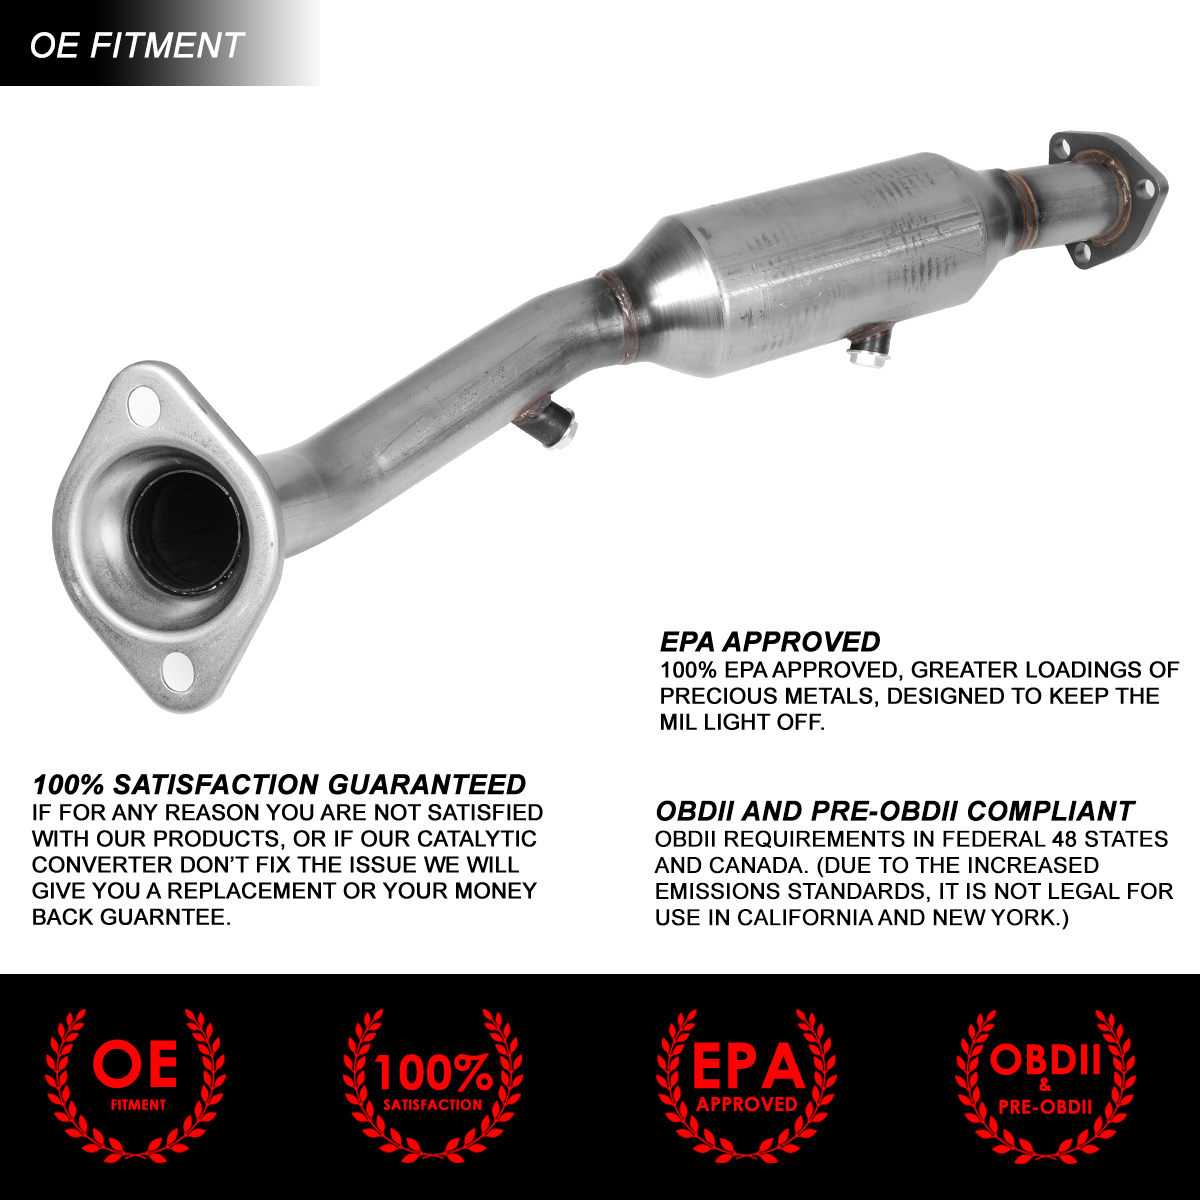 DNA Motoring OEM-CONV-YW-006 For 2002 to 2006 Honda CRV 2.4L Factory Style Exhaust Rear Catalytic Converter